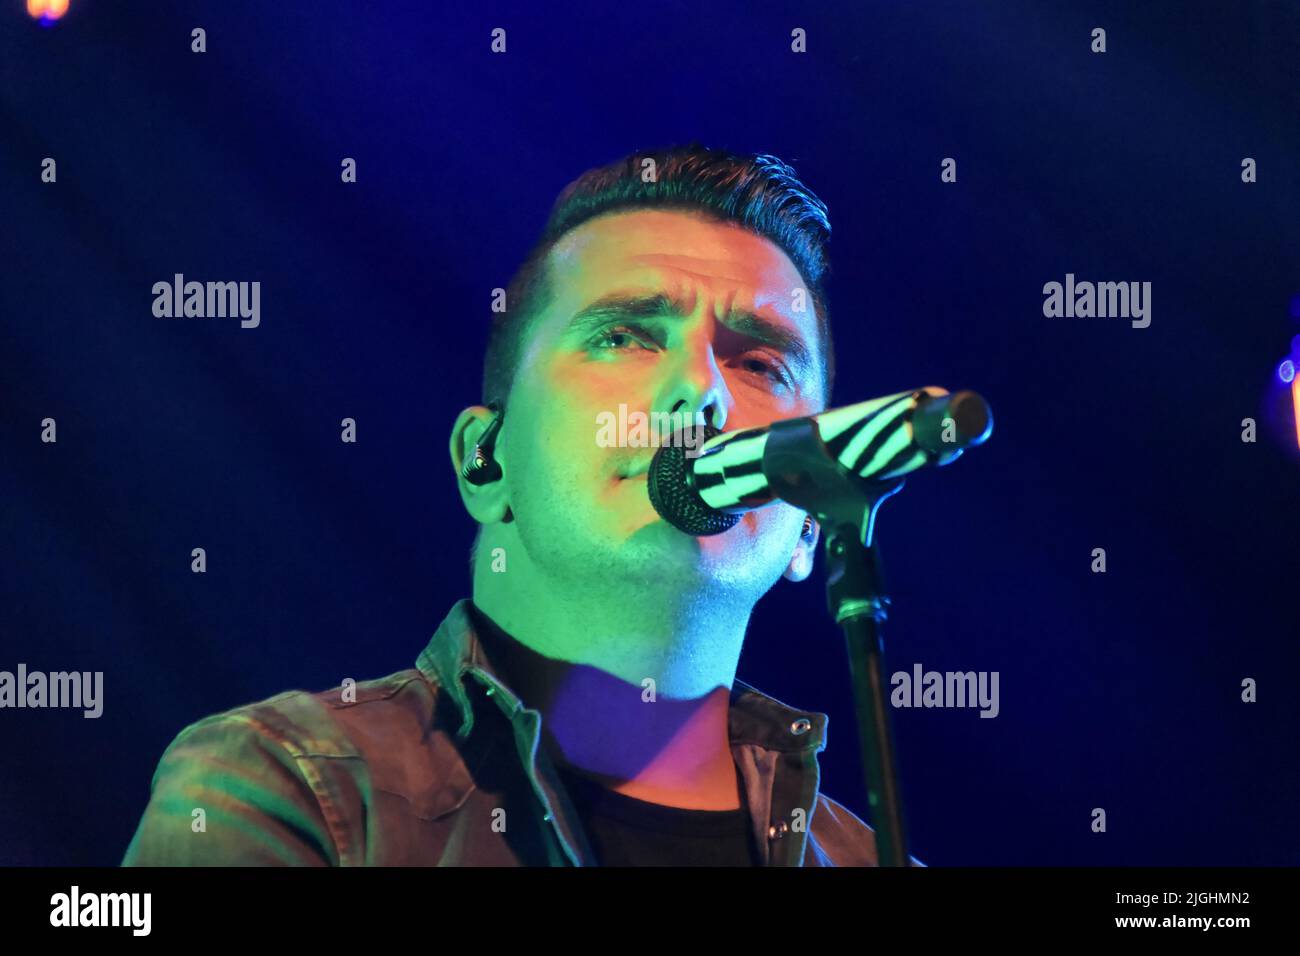 A closeup of Jan Smit performing at a concert in Steenwijk, The Netherlands Stock Photo